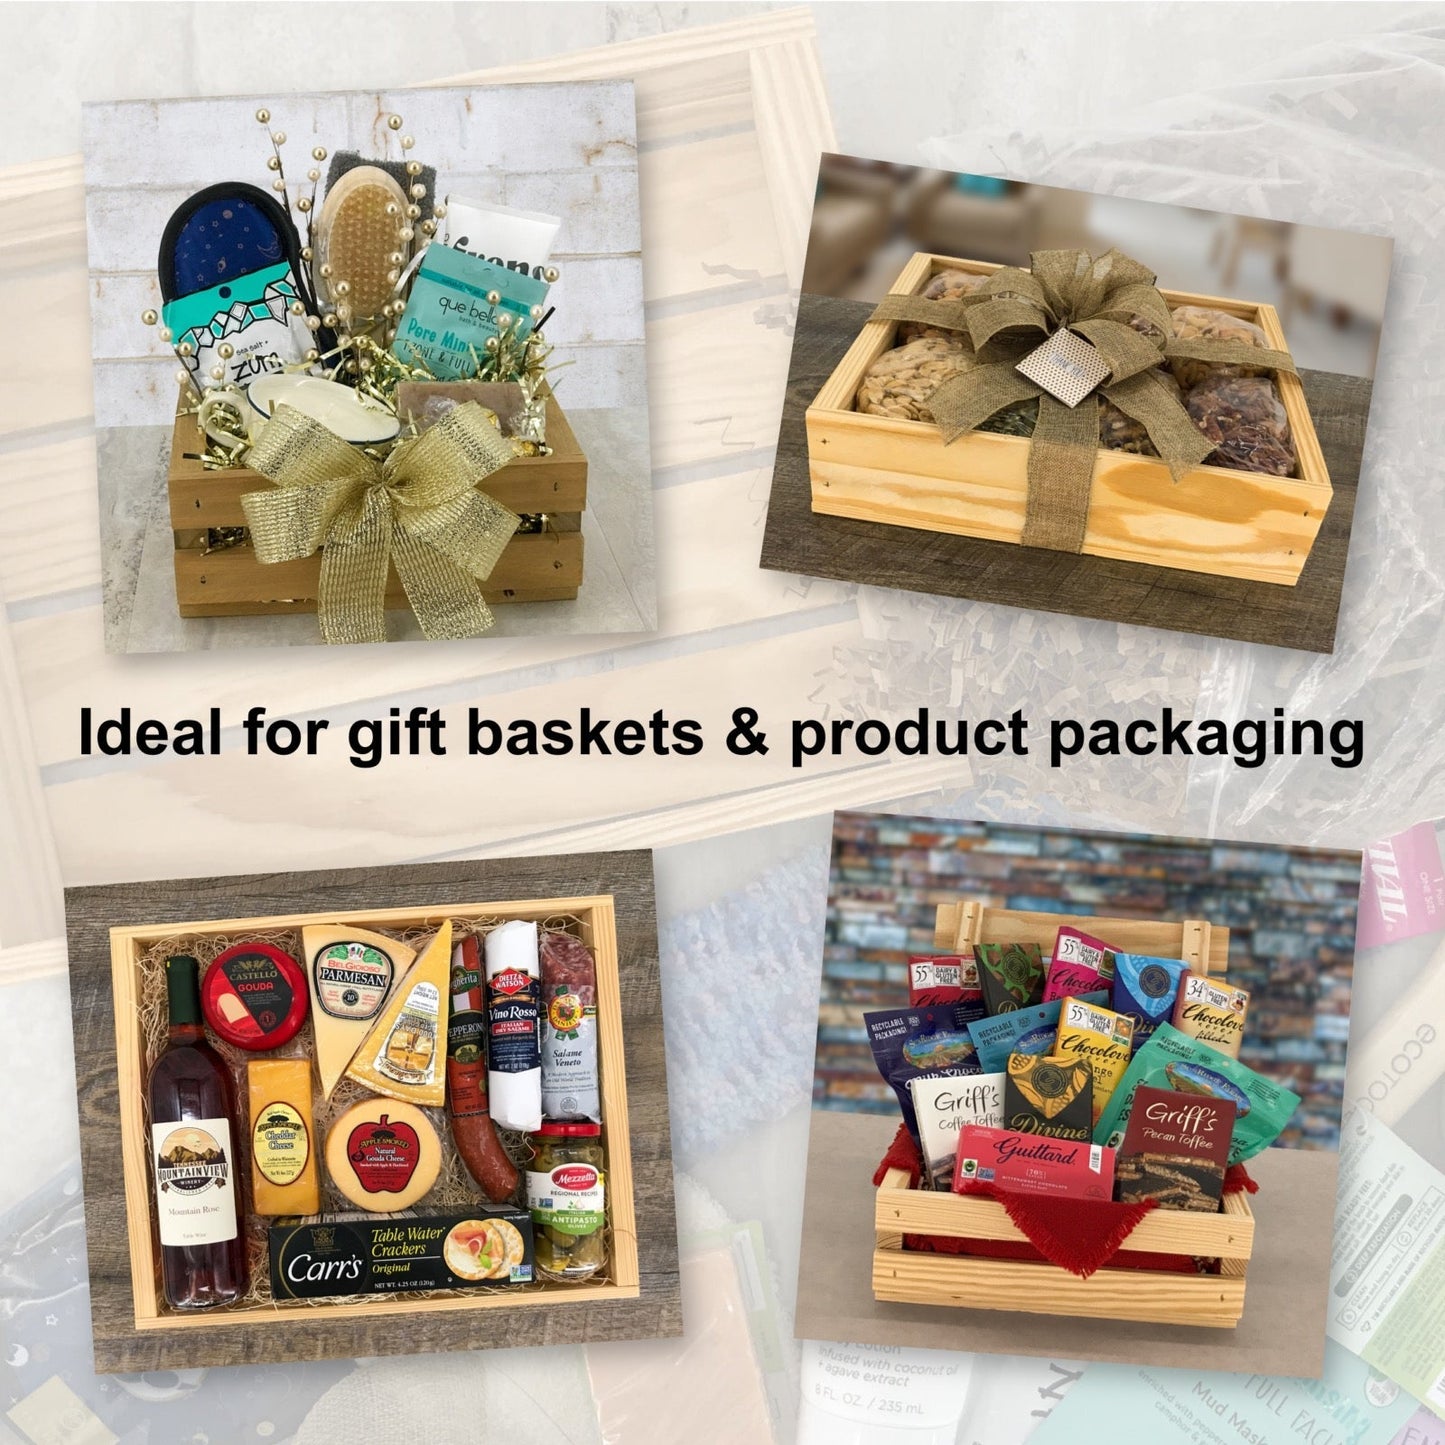 Ideal for gift baskets and product packaging, SS-12-10-3.5-ST-NW-NL, 6-SS-12-10-3.5-ST-NW-NL, 12-SS-12-10-3.5-ST-NW-NL, 24-SS-12-10-3.5-ST-NW-NL, 48-SS-12-10-3.5-ST-NW-NL, 96-SS-12-10-3.5-ST-NW-NL